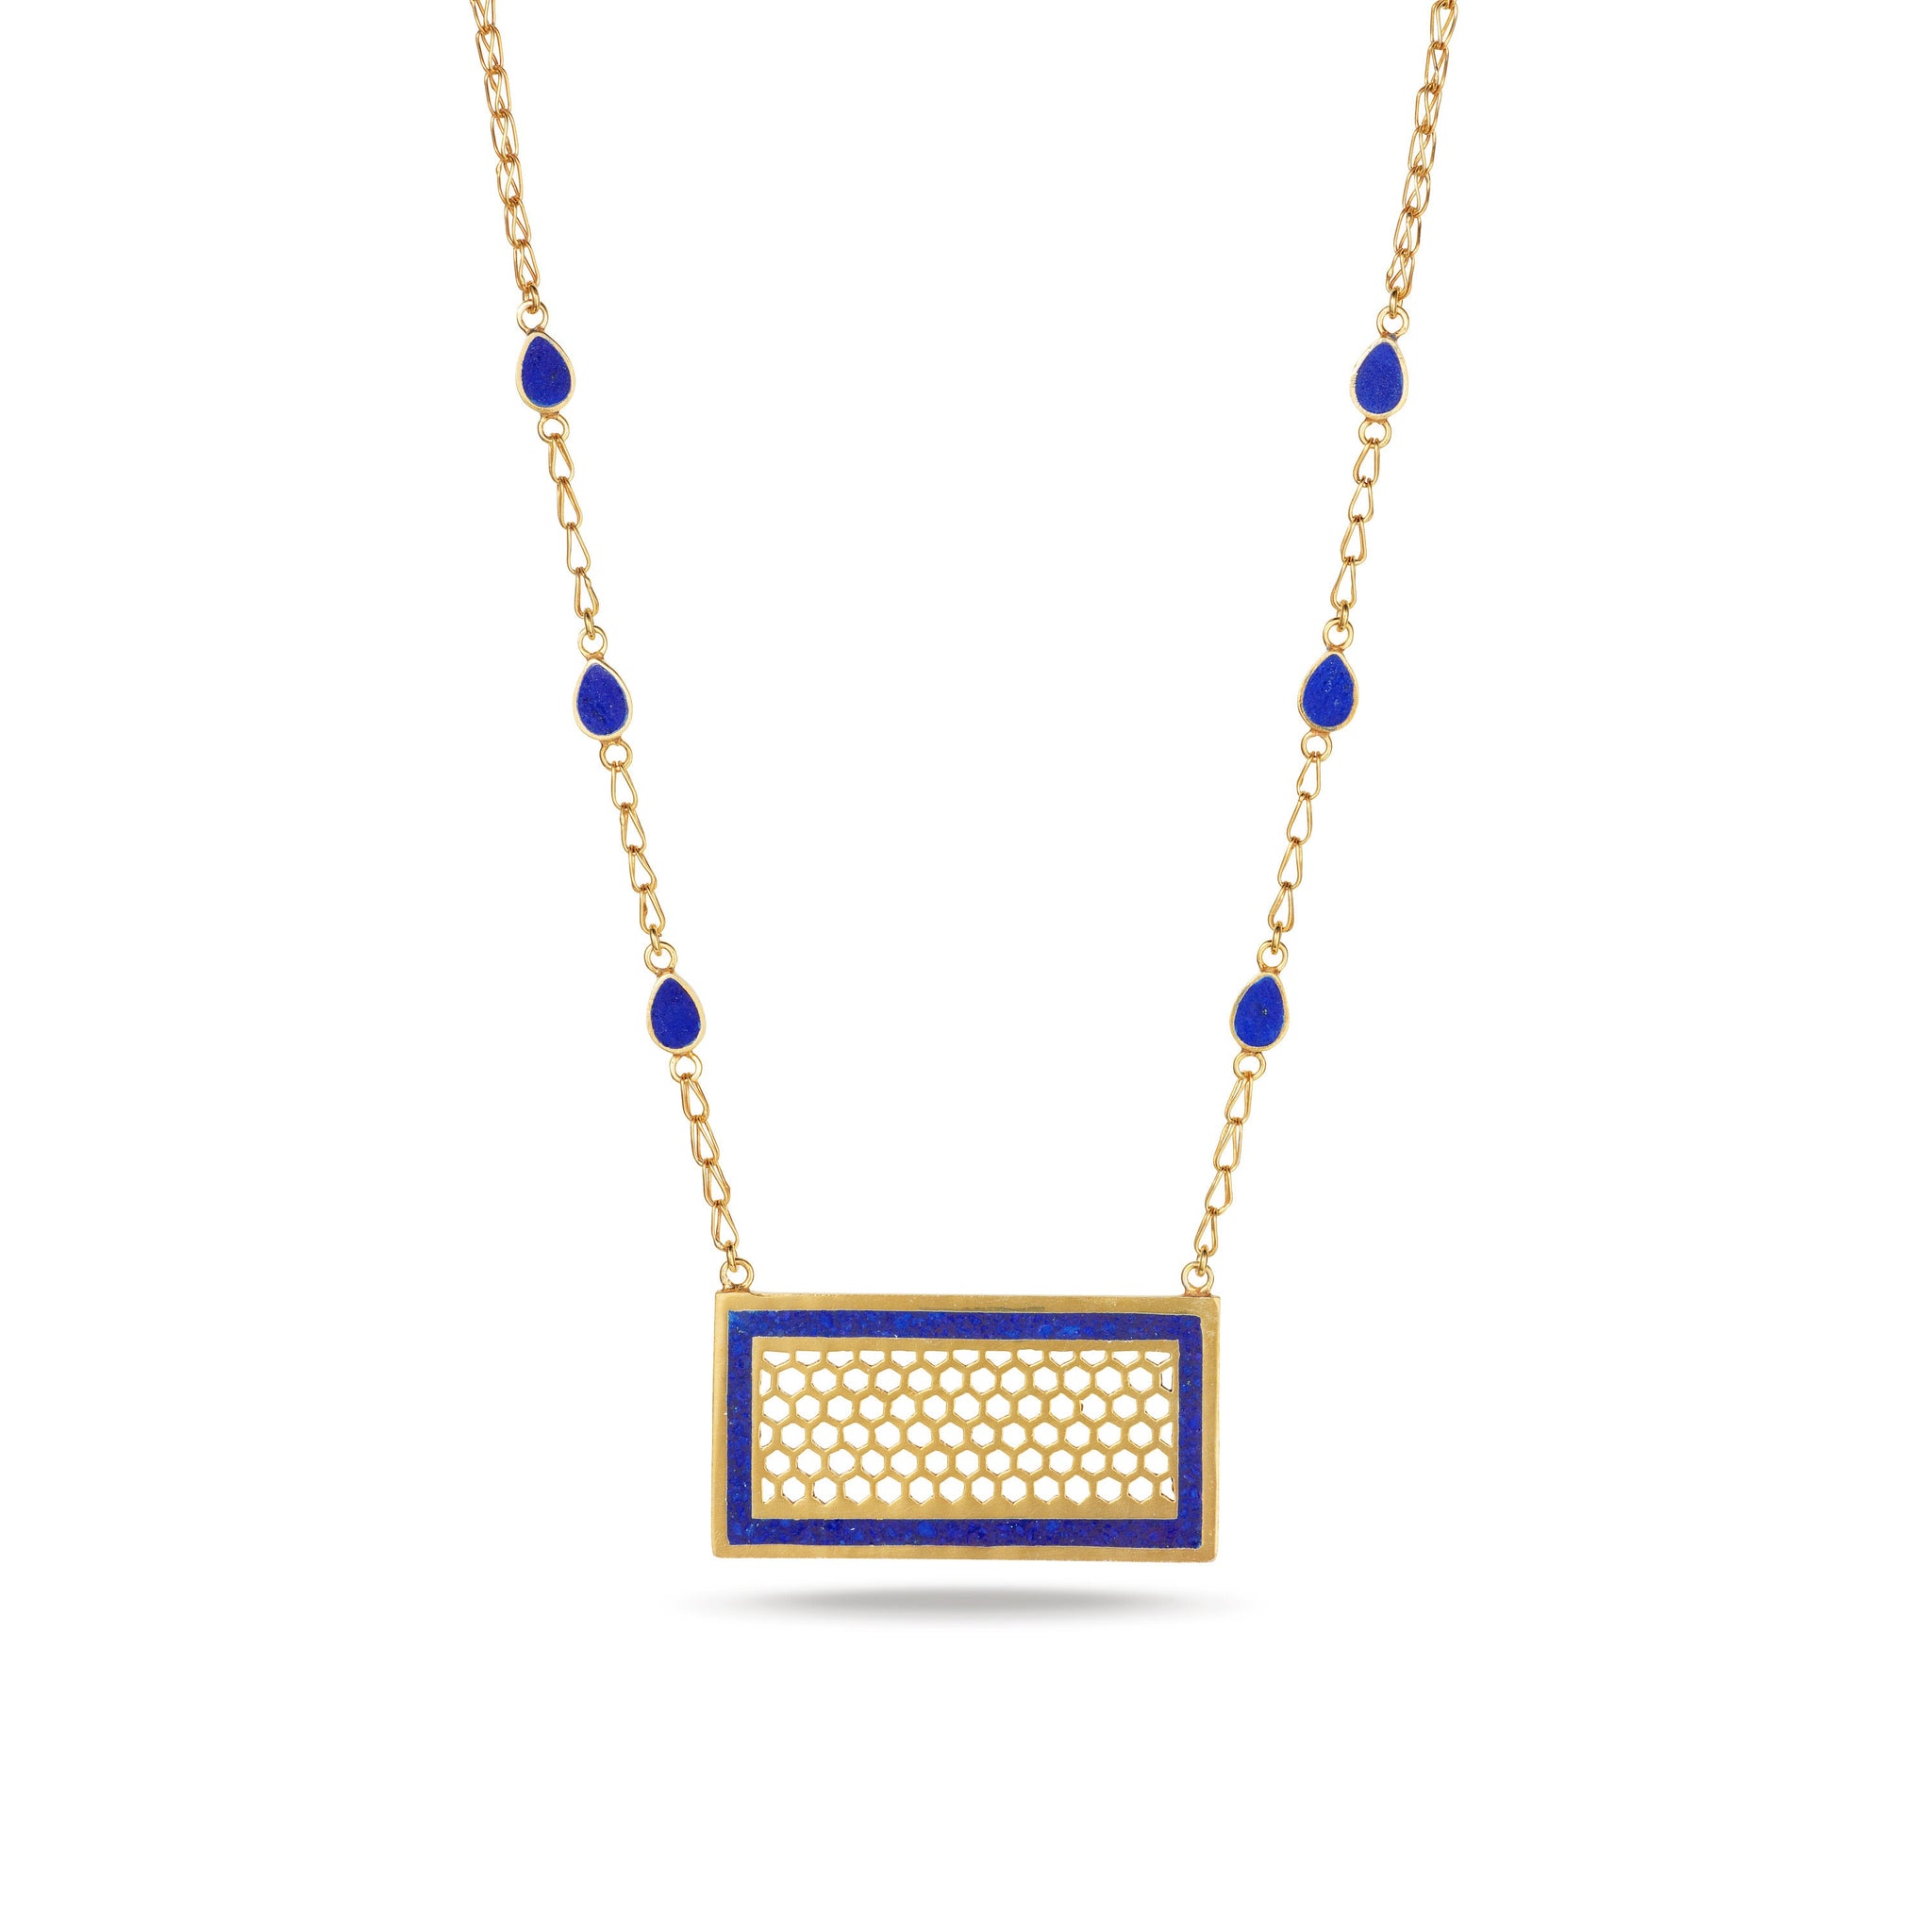 Handmade Afghan Blue Gemstone Lapis Lazuli Pendant Gold Chain Necklace Elegant Inspired Jewelry Drop Chic Accessories Bridal Gift for Her